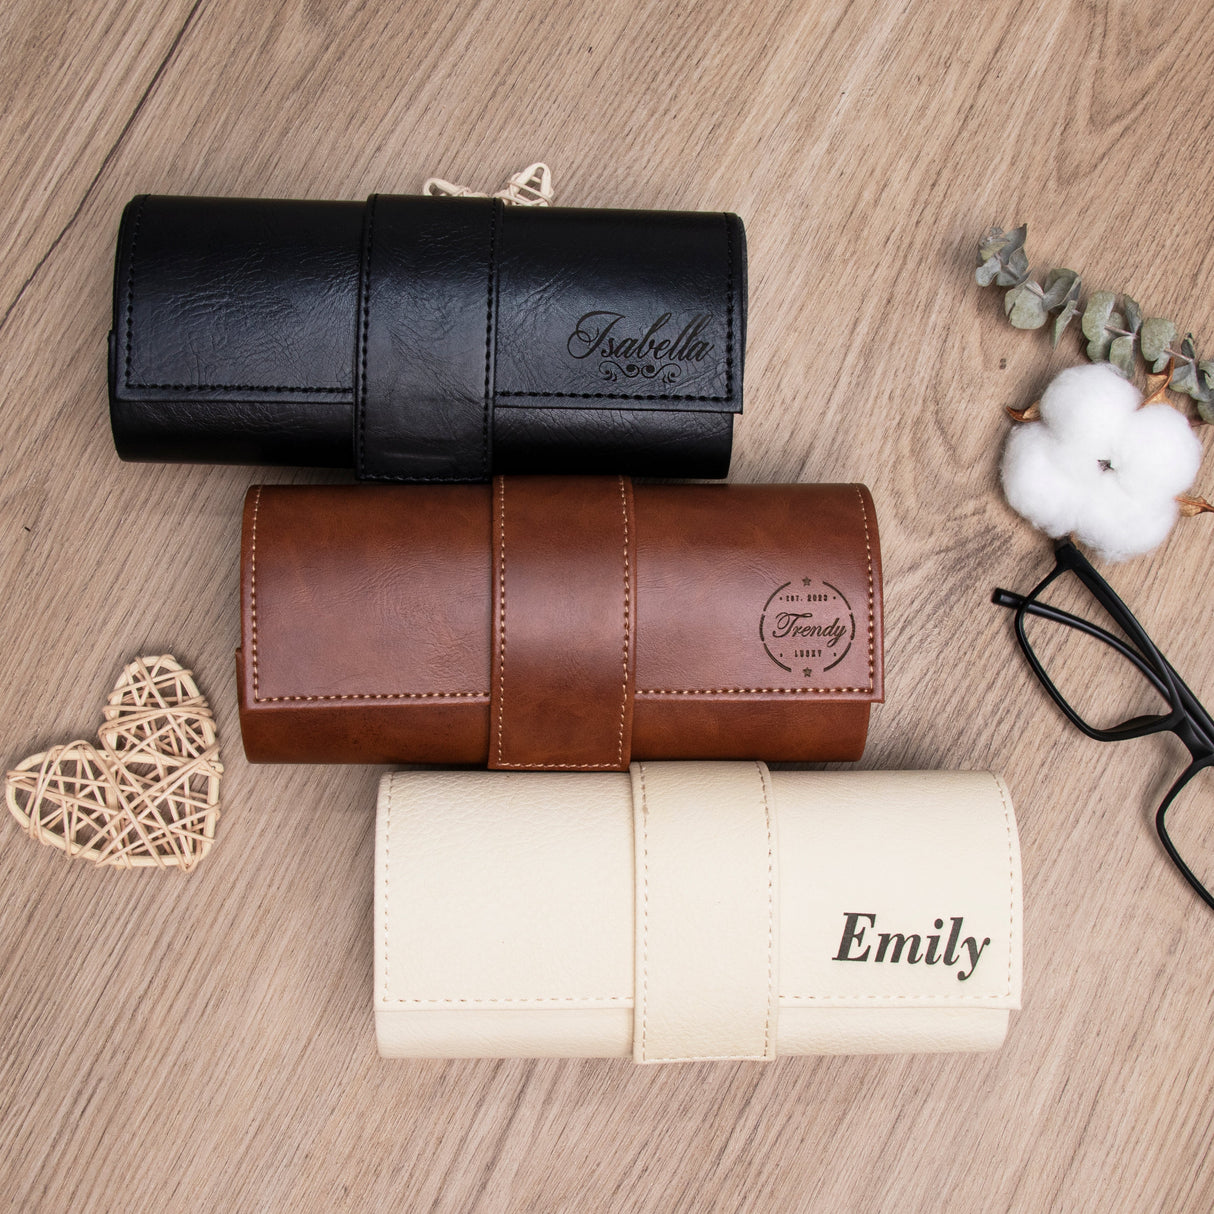 GEX Personalized Leather Glasses Case Sunglasses Holder with Name - GexWorldwide